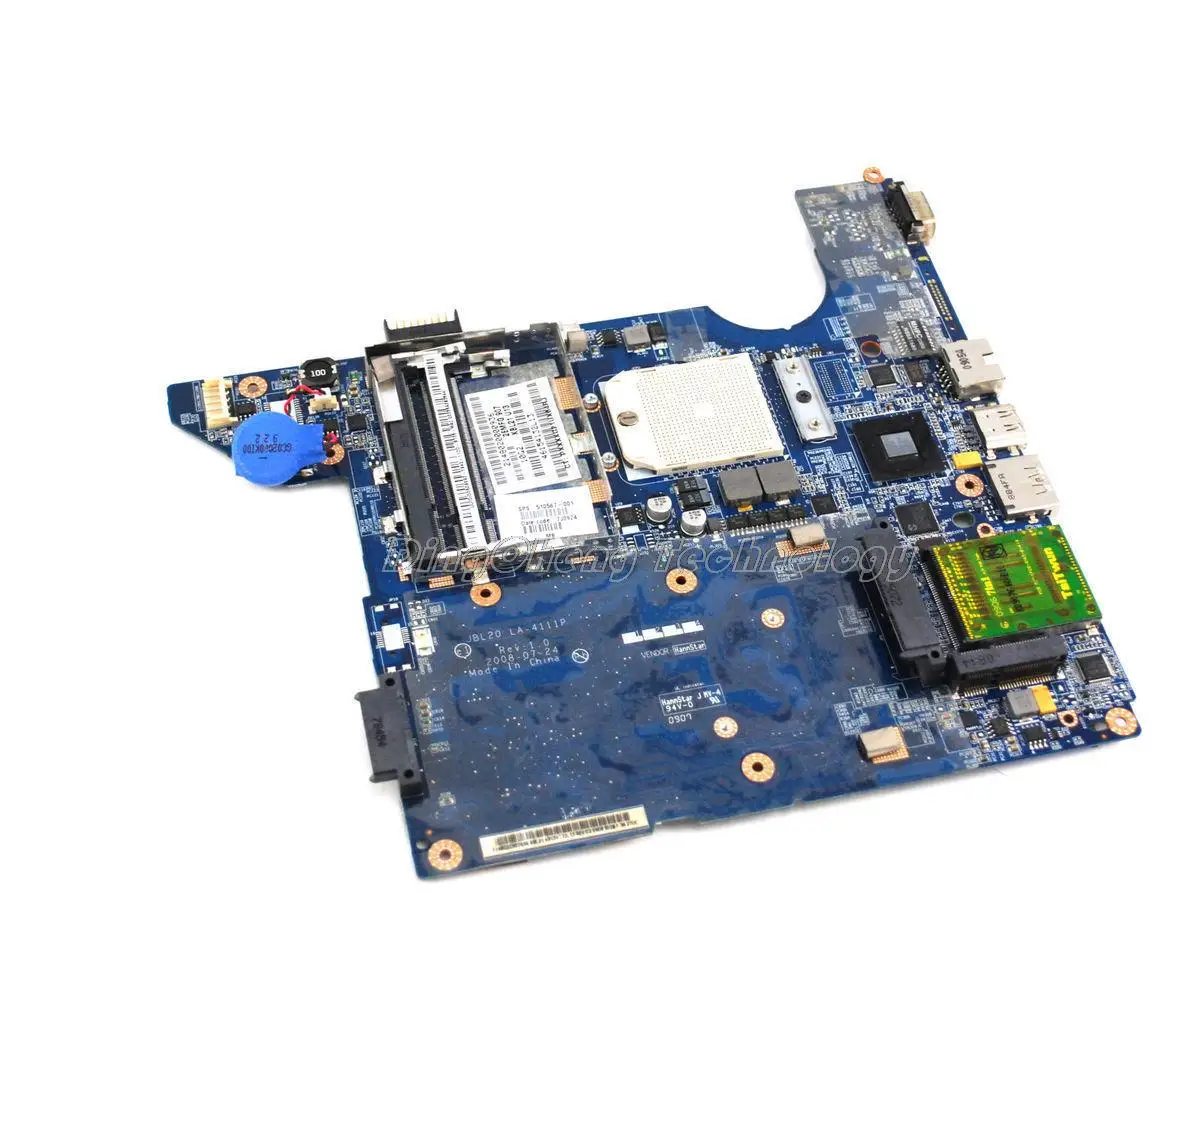 45 days Warranty laptop Motherboard For hp Compaq CQ40 510567-001 for AMD cpu with integrated graphic card tested fully